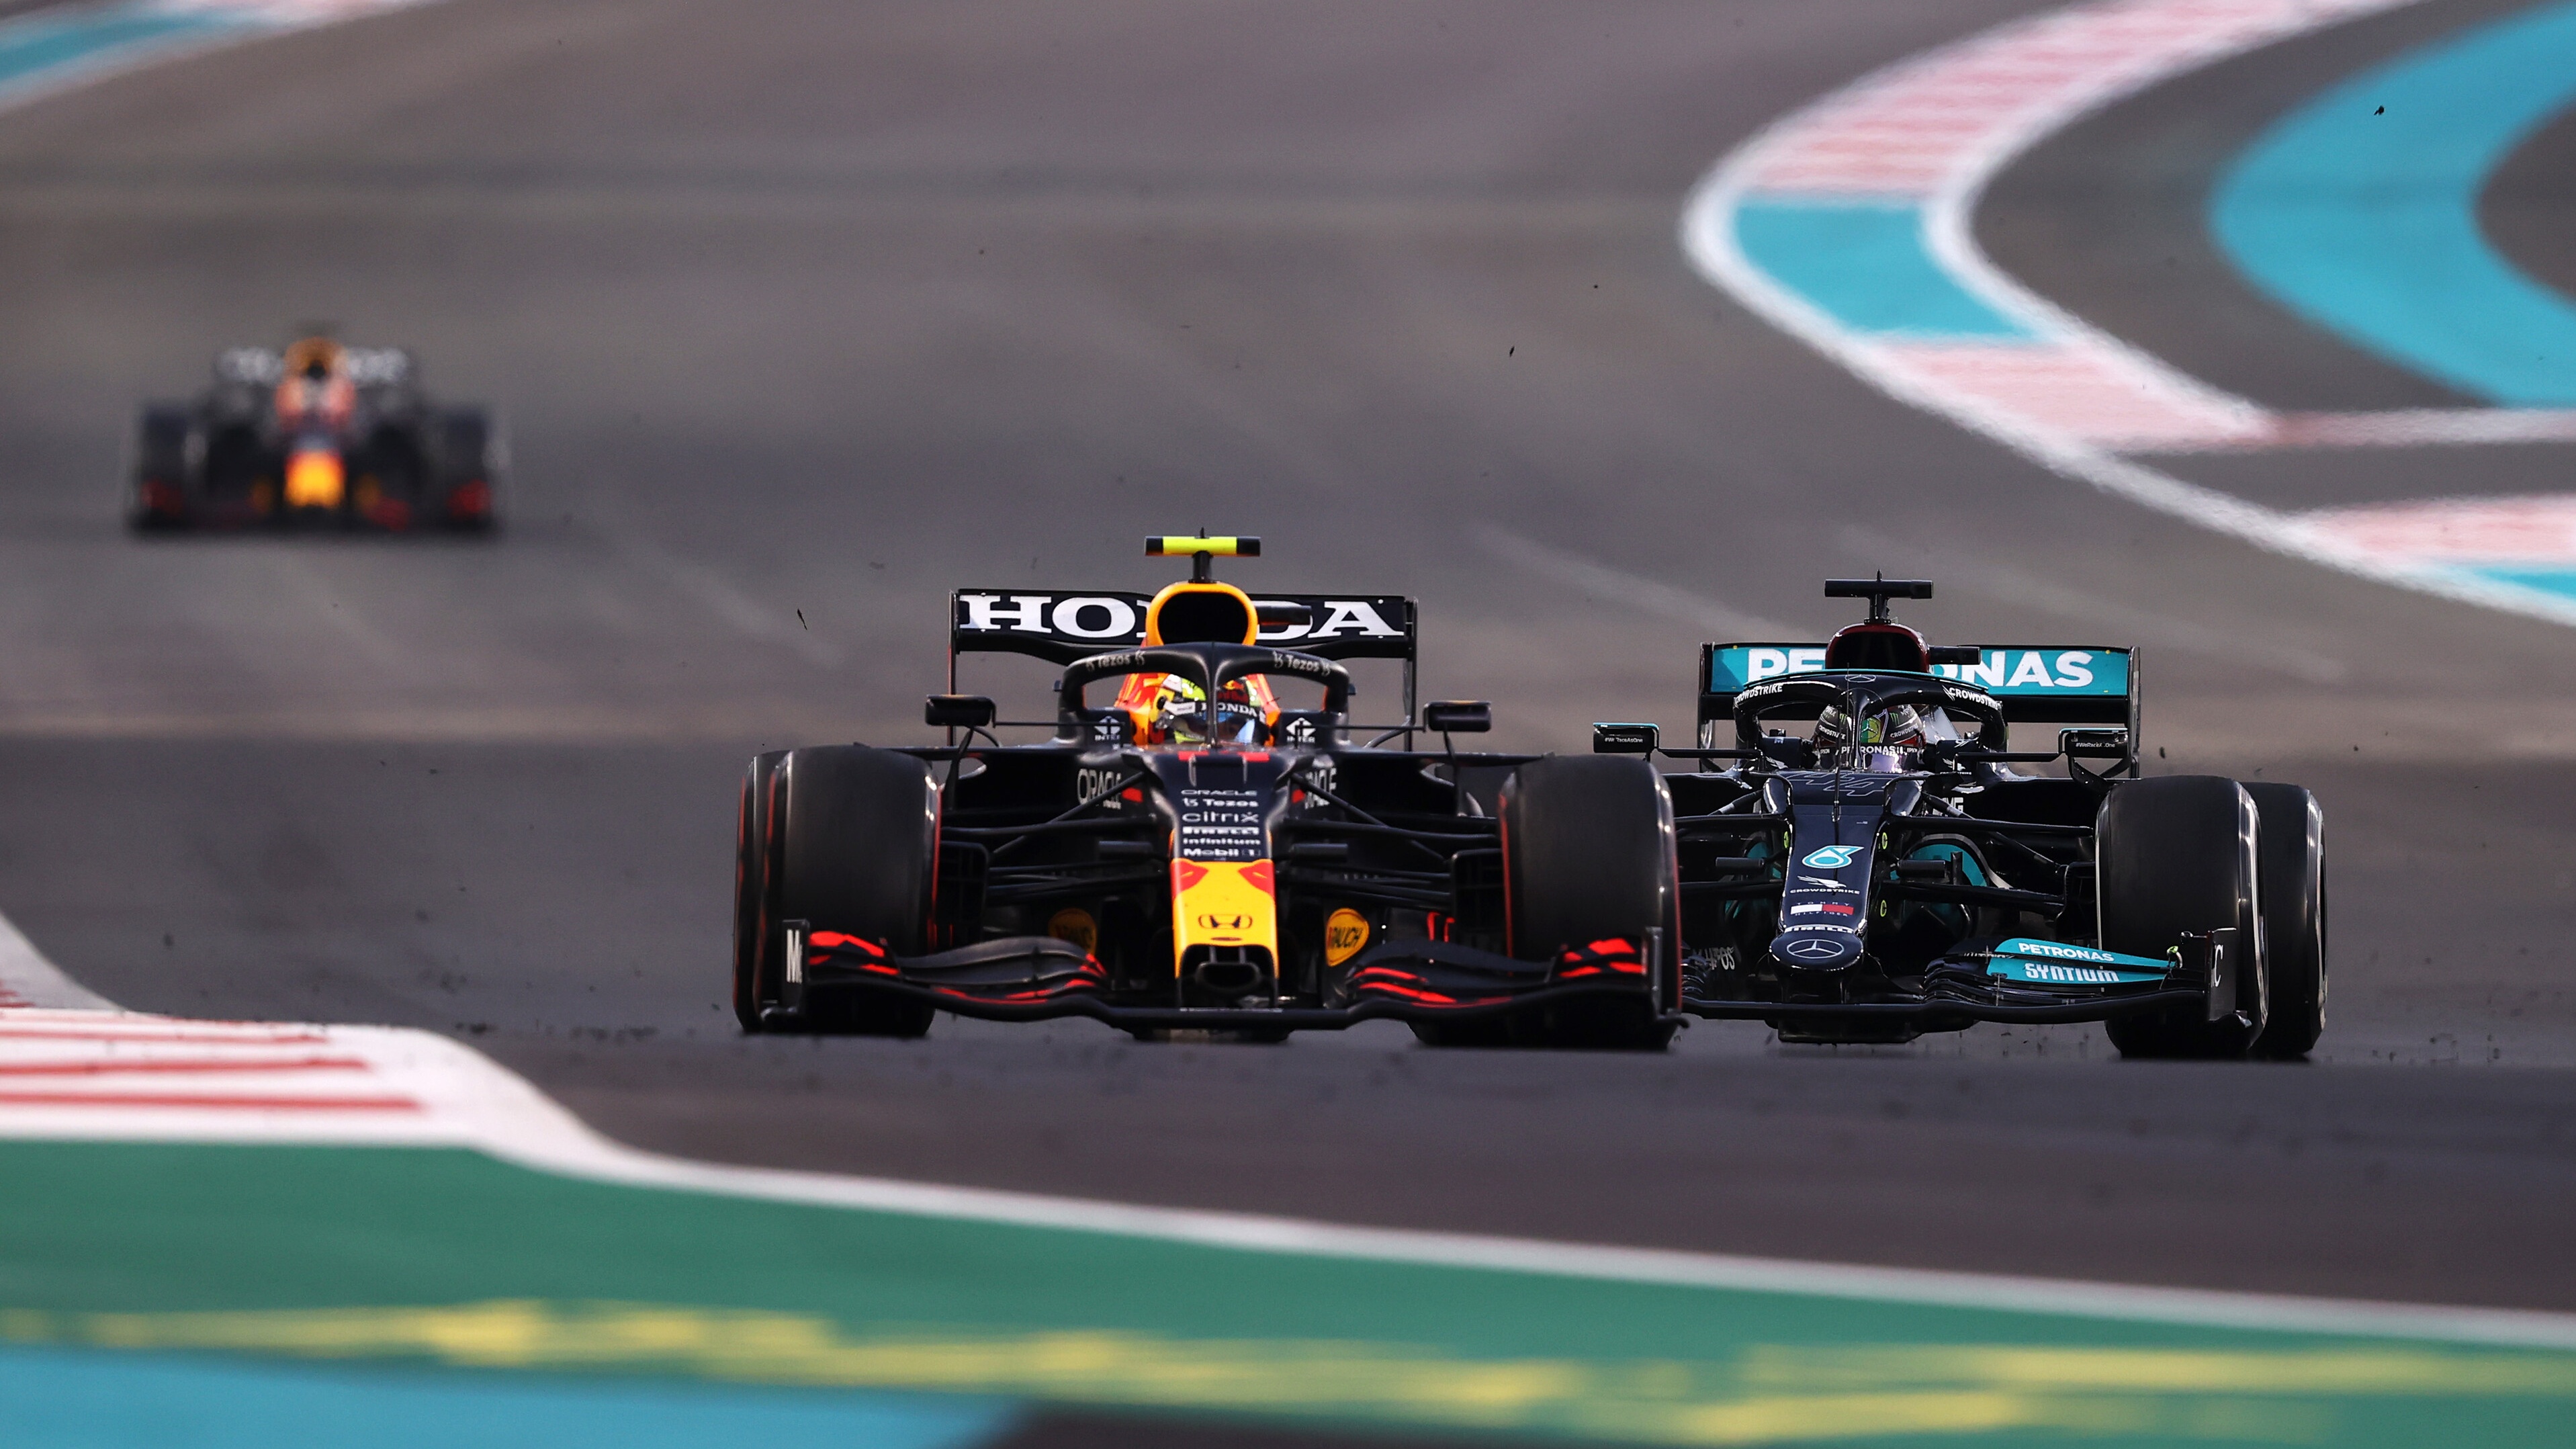 Abu Dhabi Grand Prix live stream how to watch the F1 for free, online and on TV, Verstappen on pole What Hi-Fi?